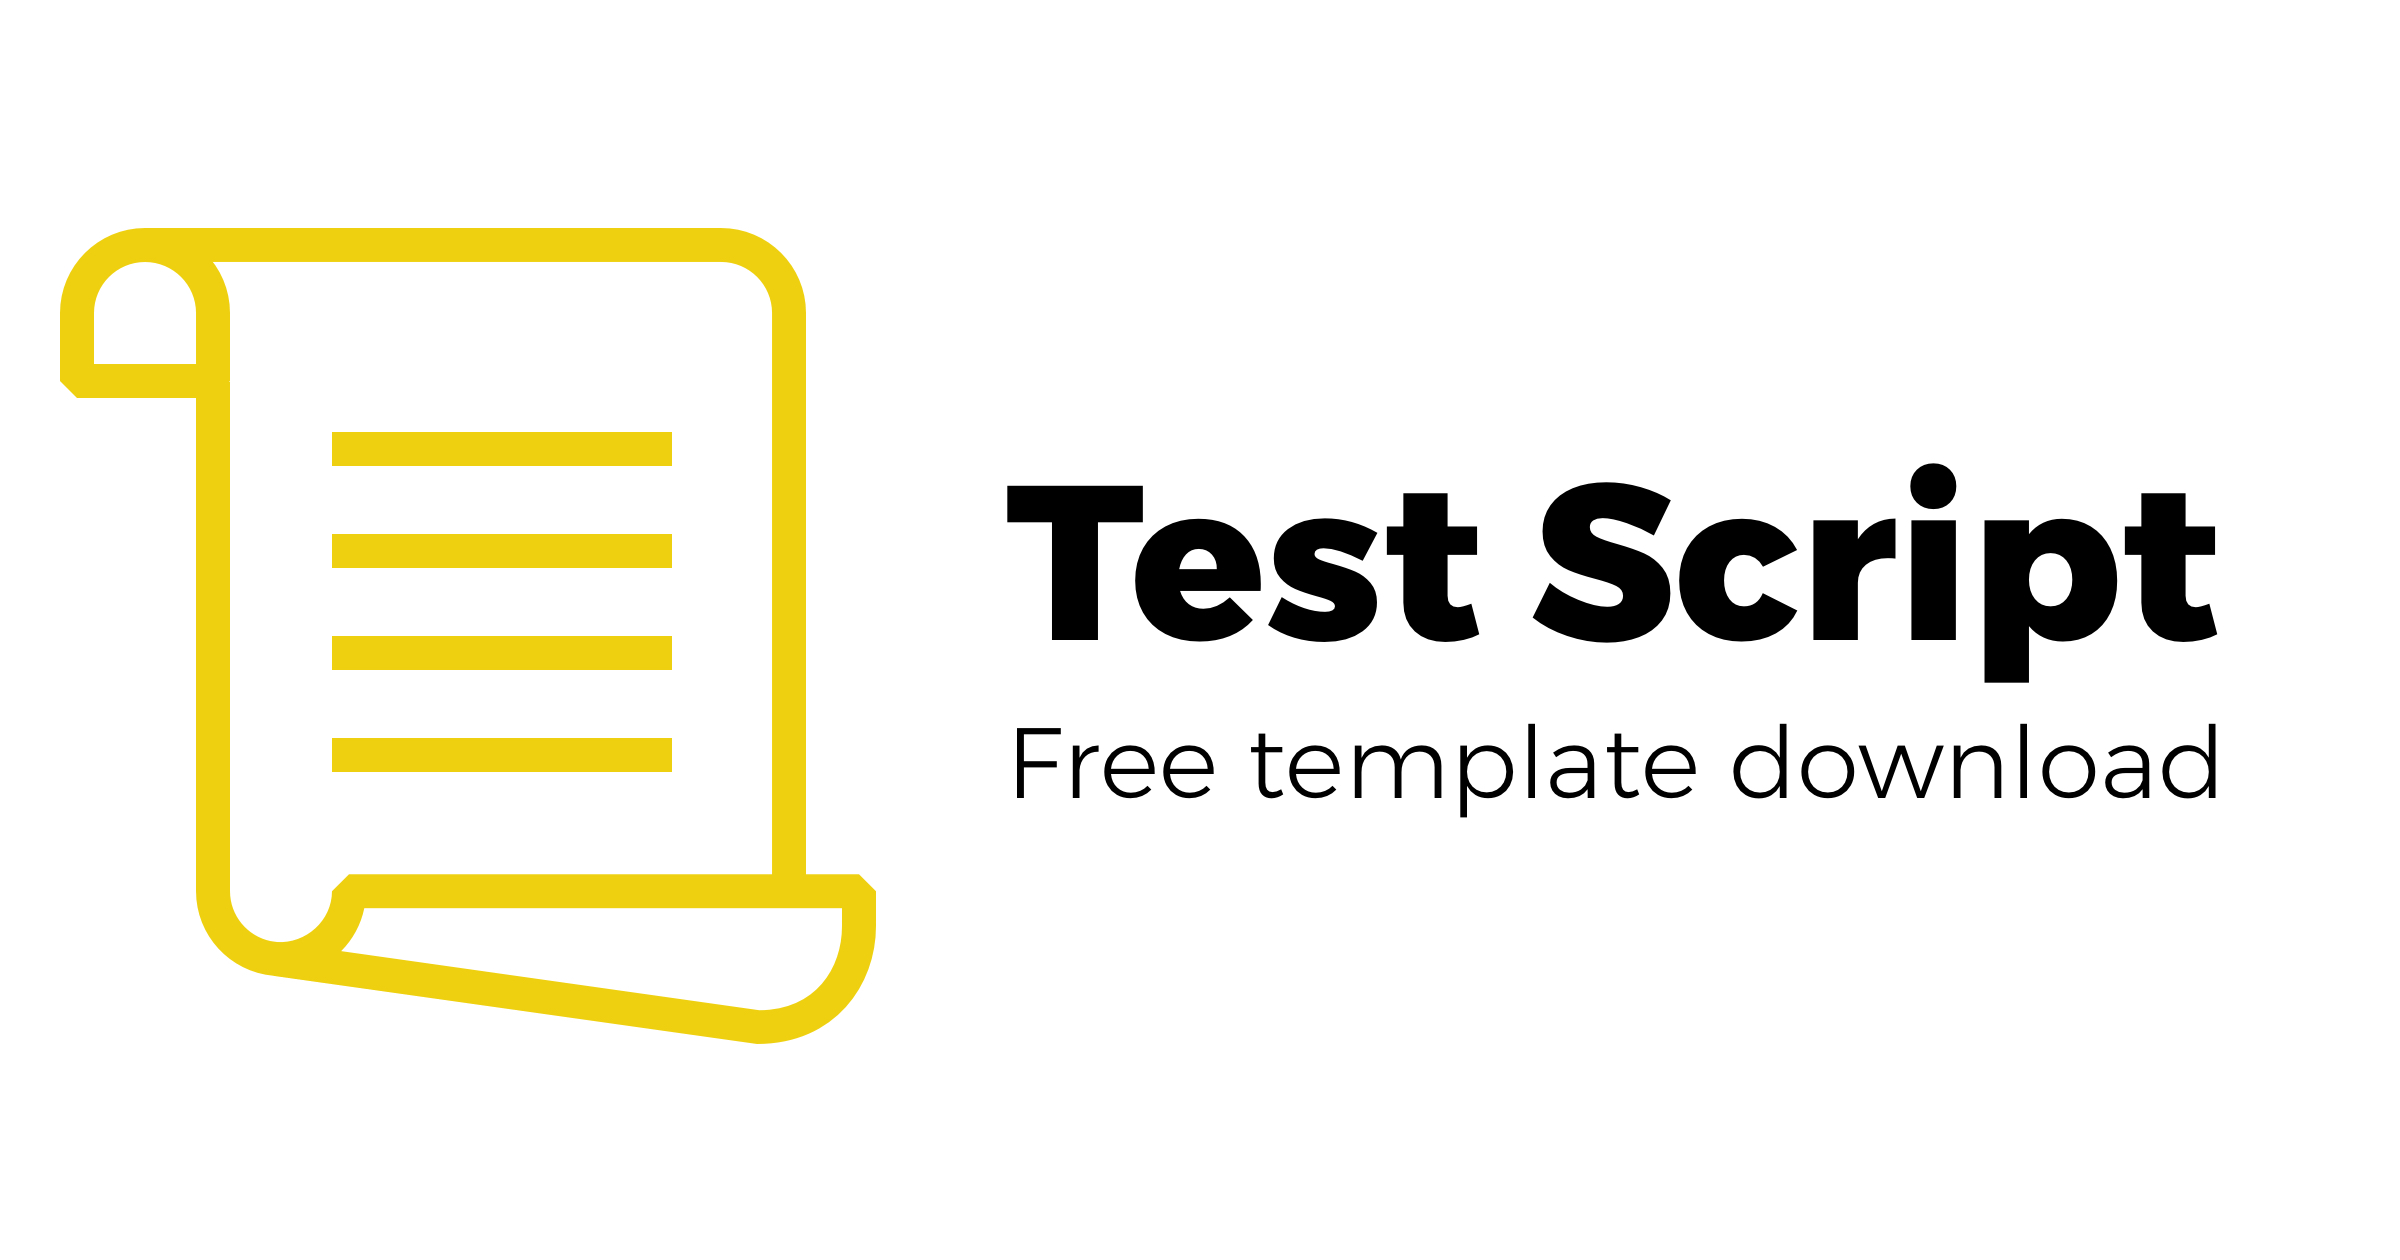 Use our free template to prepare your UX test